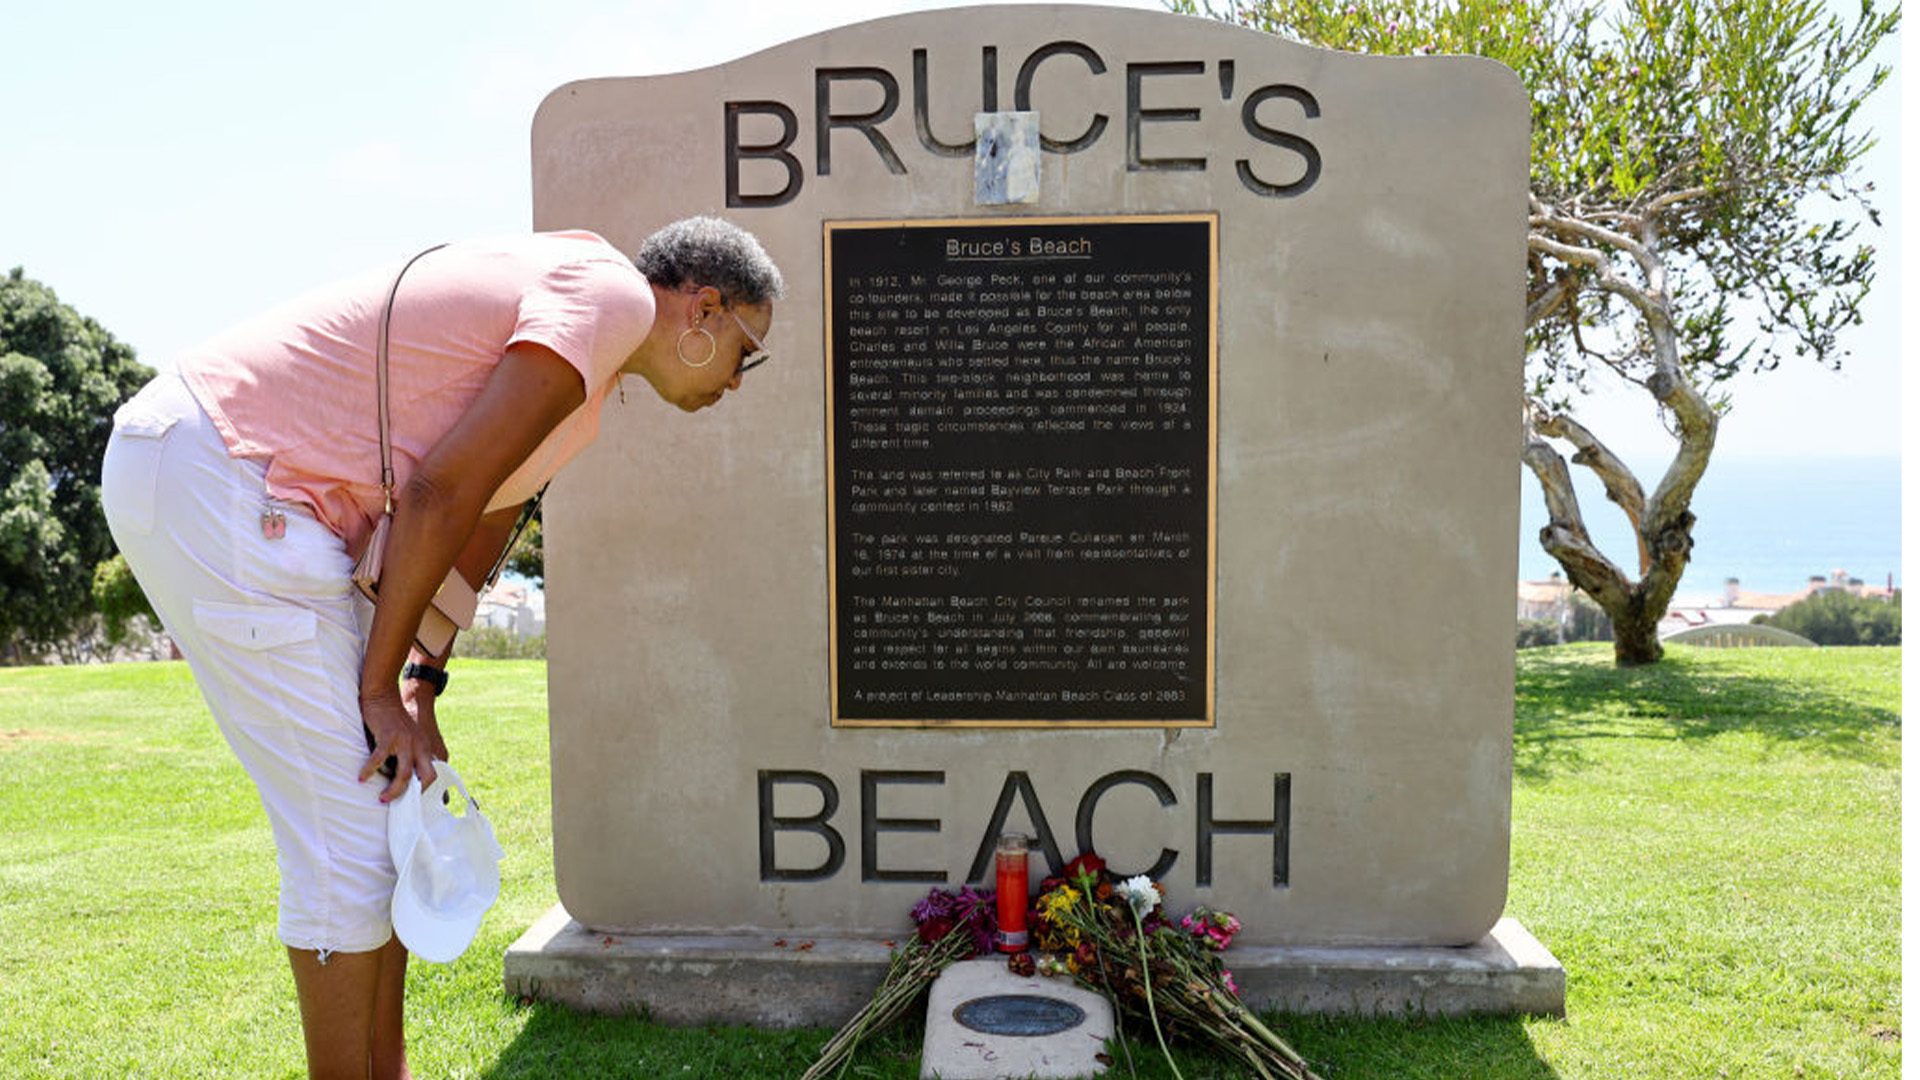 Black Family Plans To Sell Bruce's Beach Property Back To L.A. County For Nearly $20M